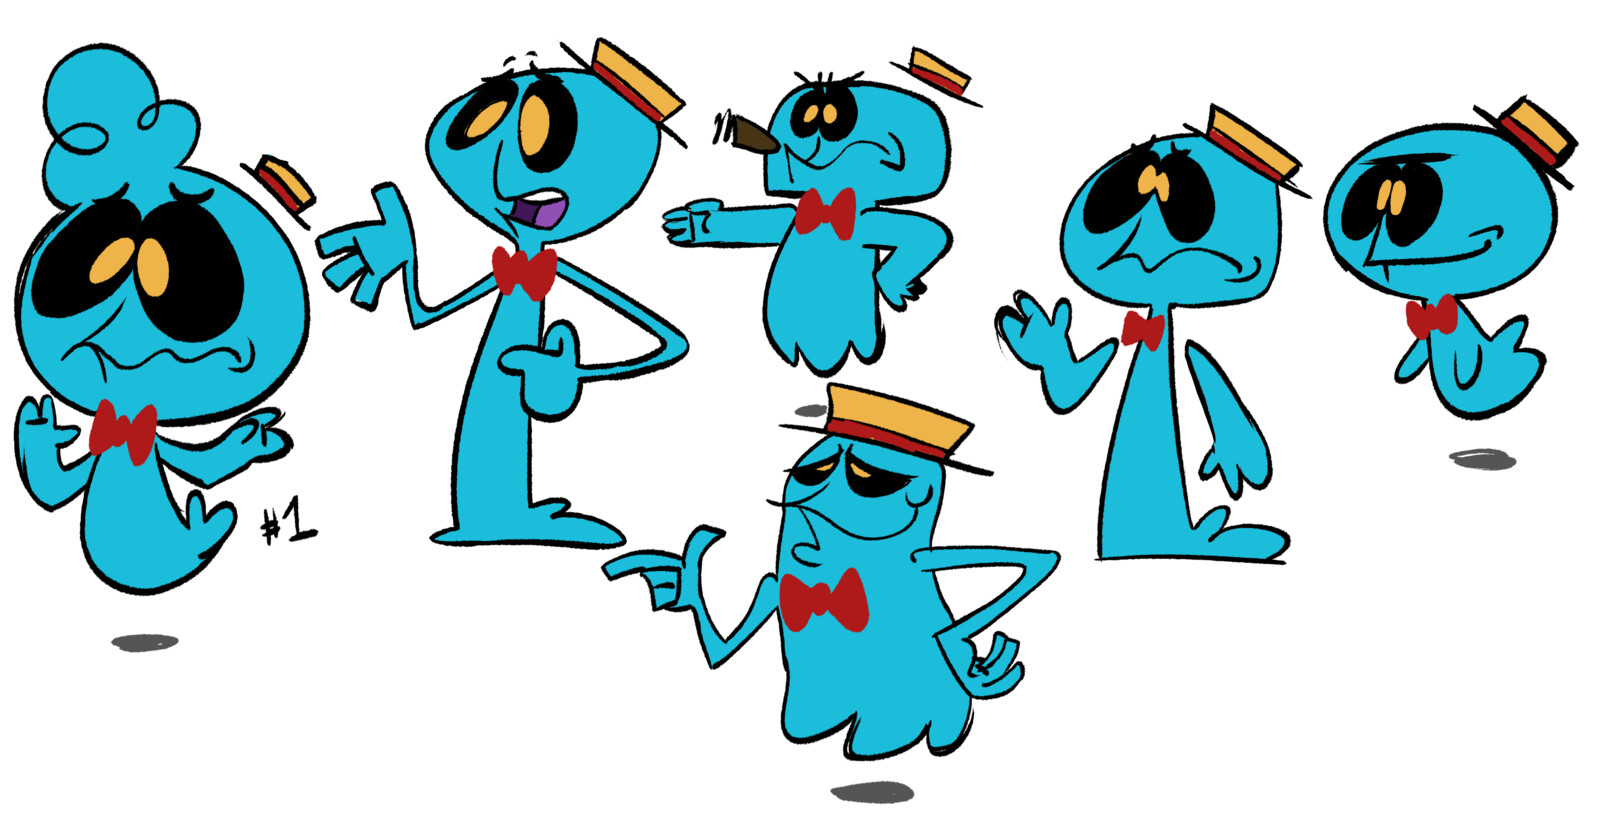 Boo Berry Character Exploration